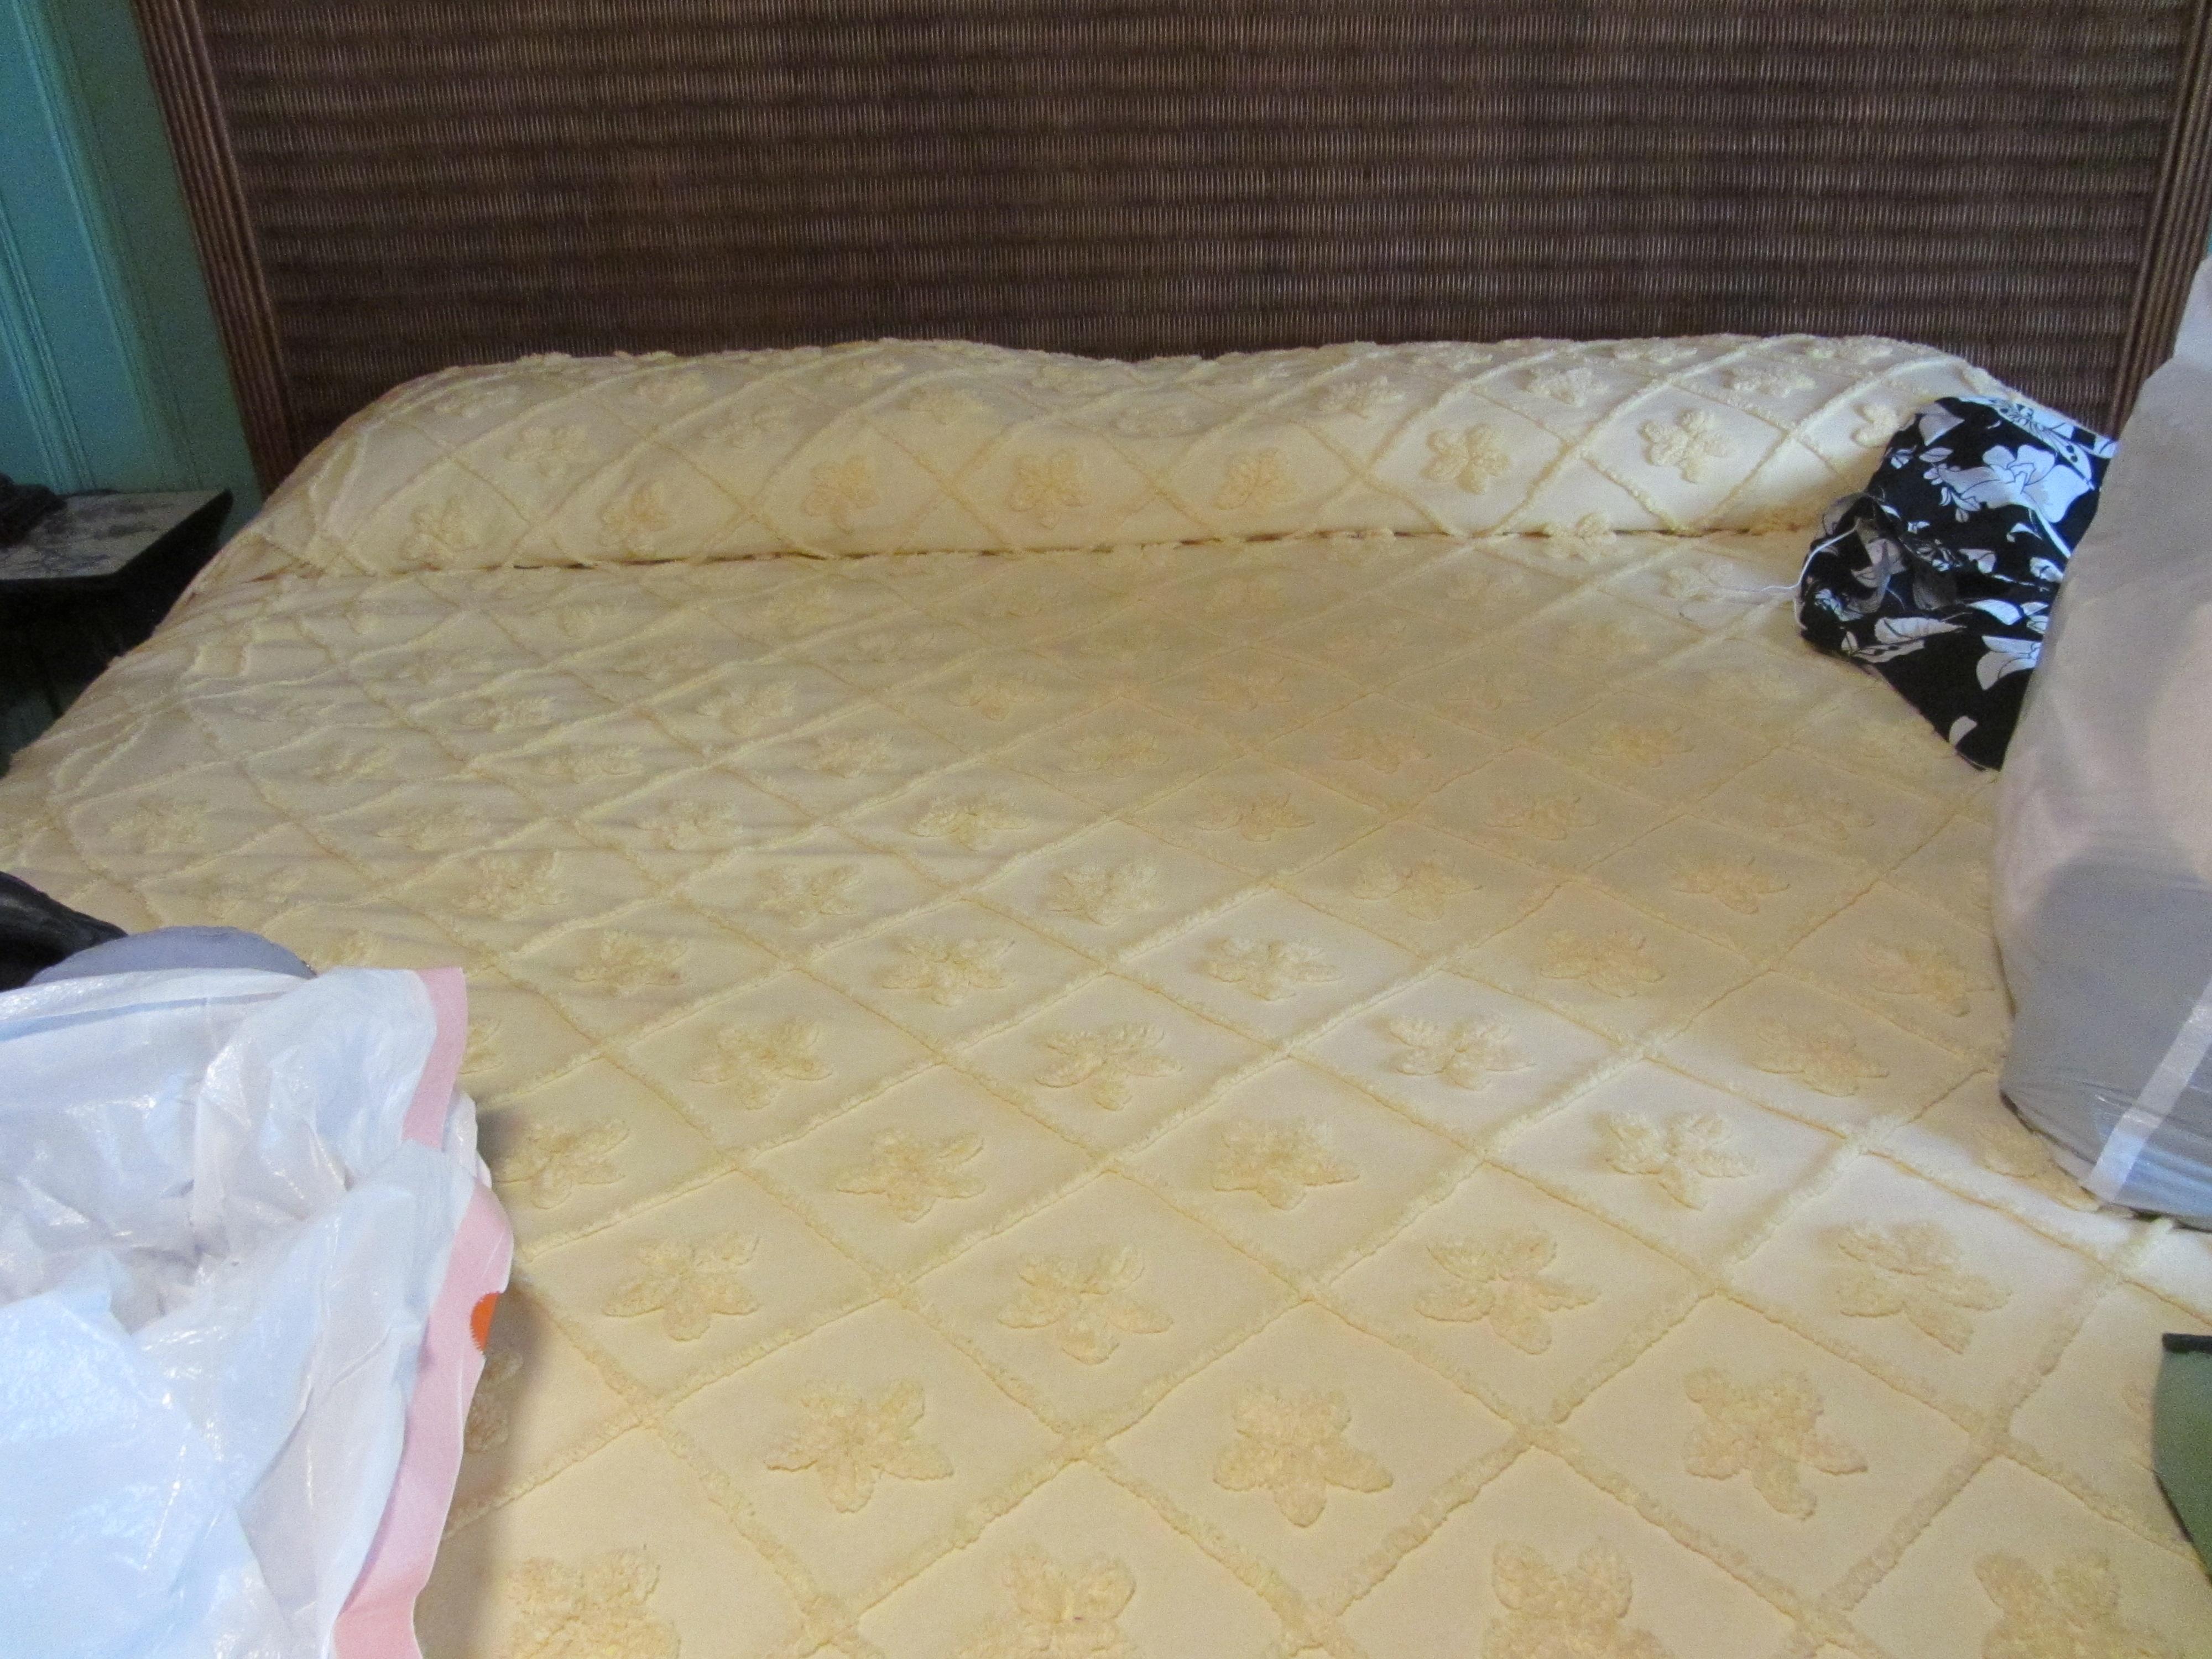 cheap very thin old and smelled bad bedspread not silk or satin lik on their website